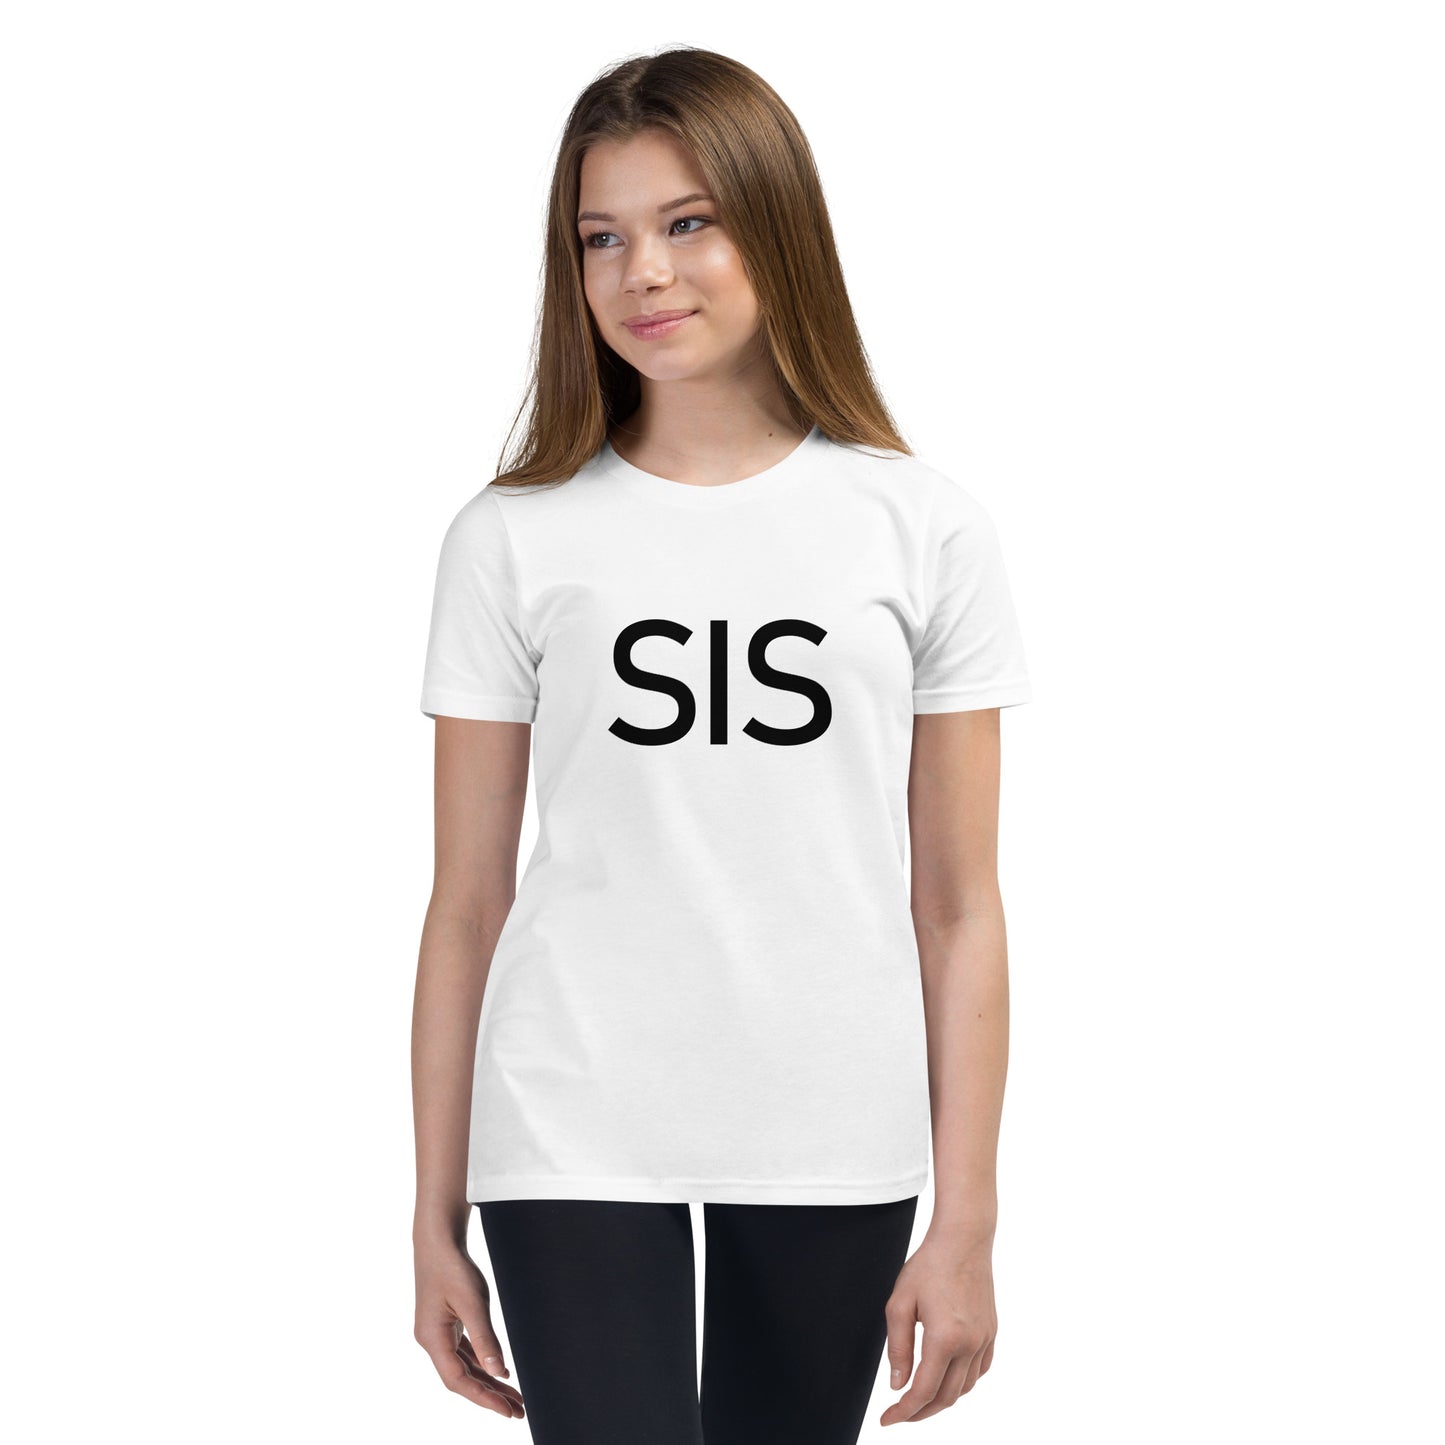 Sis - Sustainably Made Kids T-Shirt